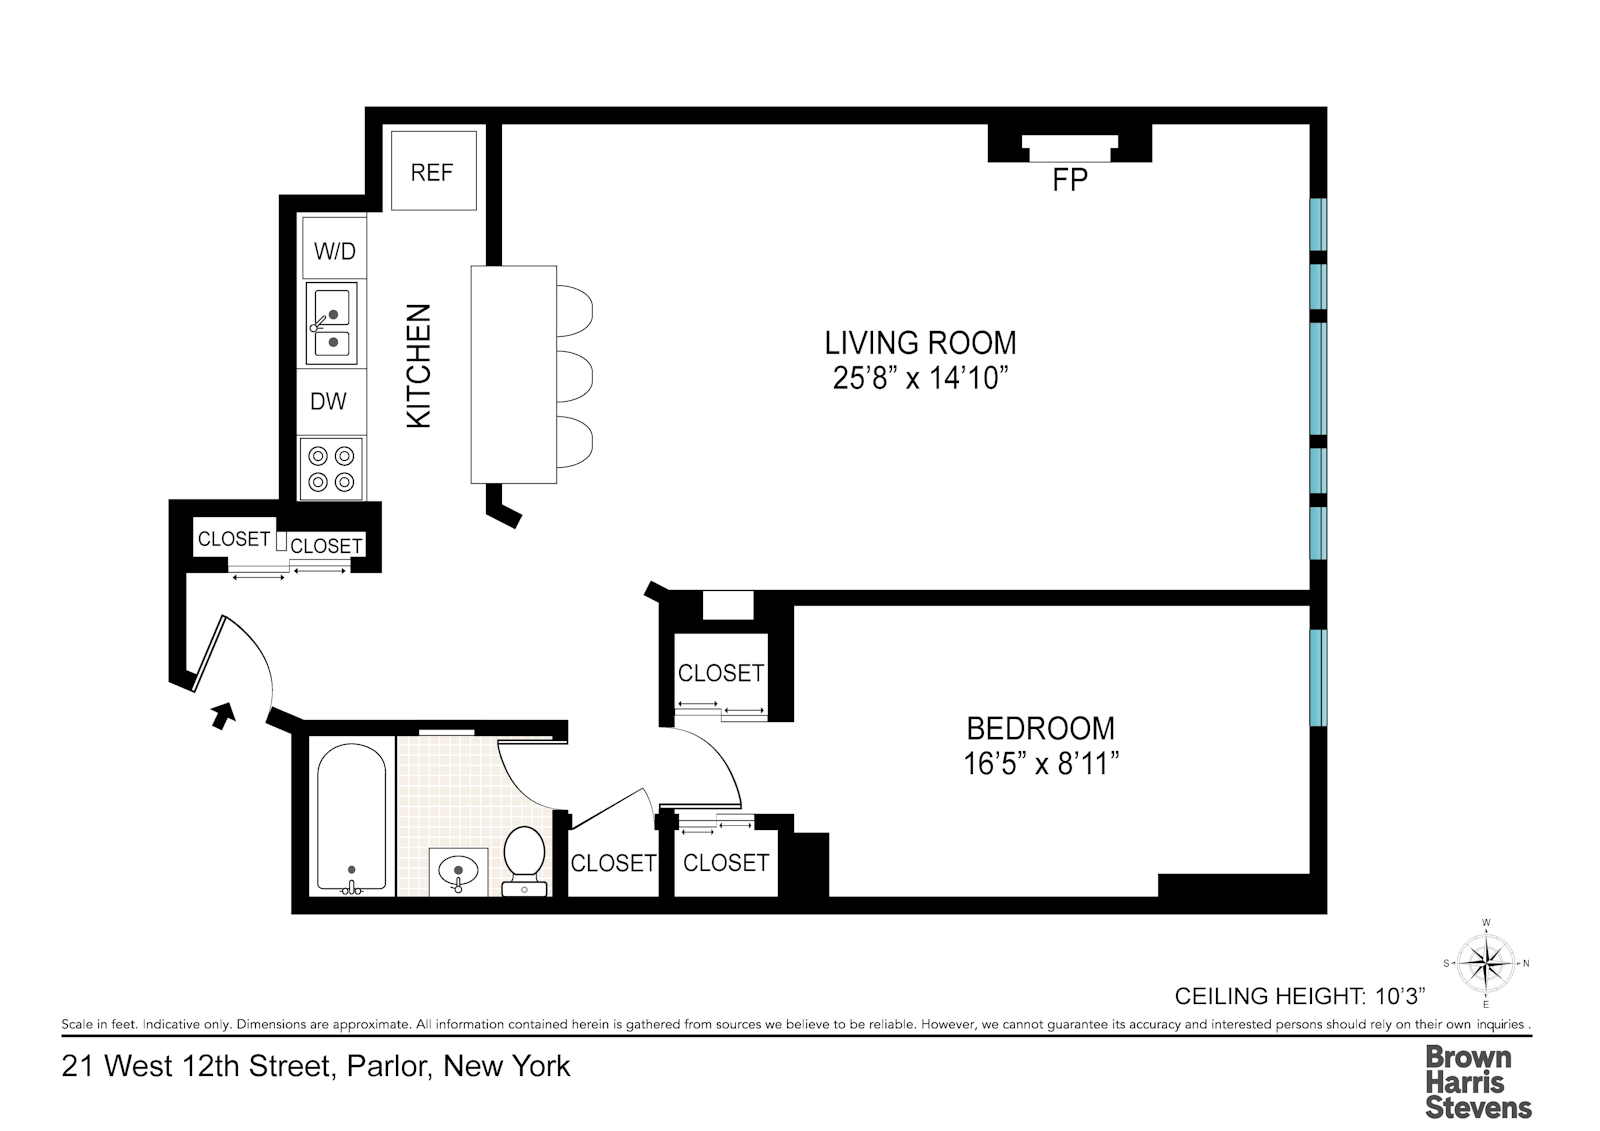 Floorplan for 21 West 12th Street, PARLOR